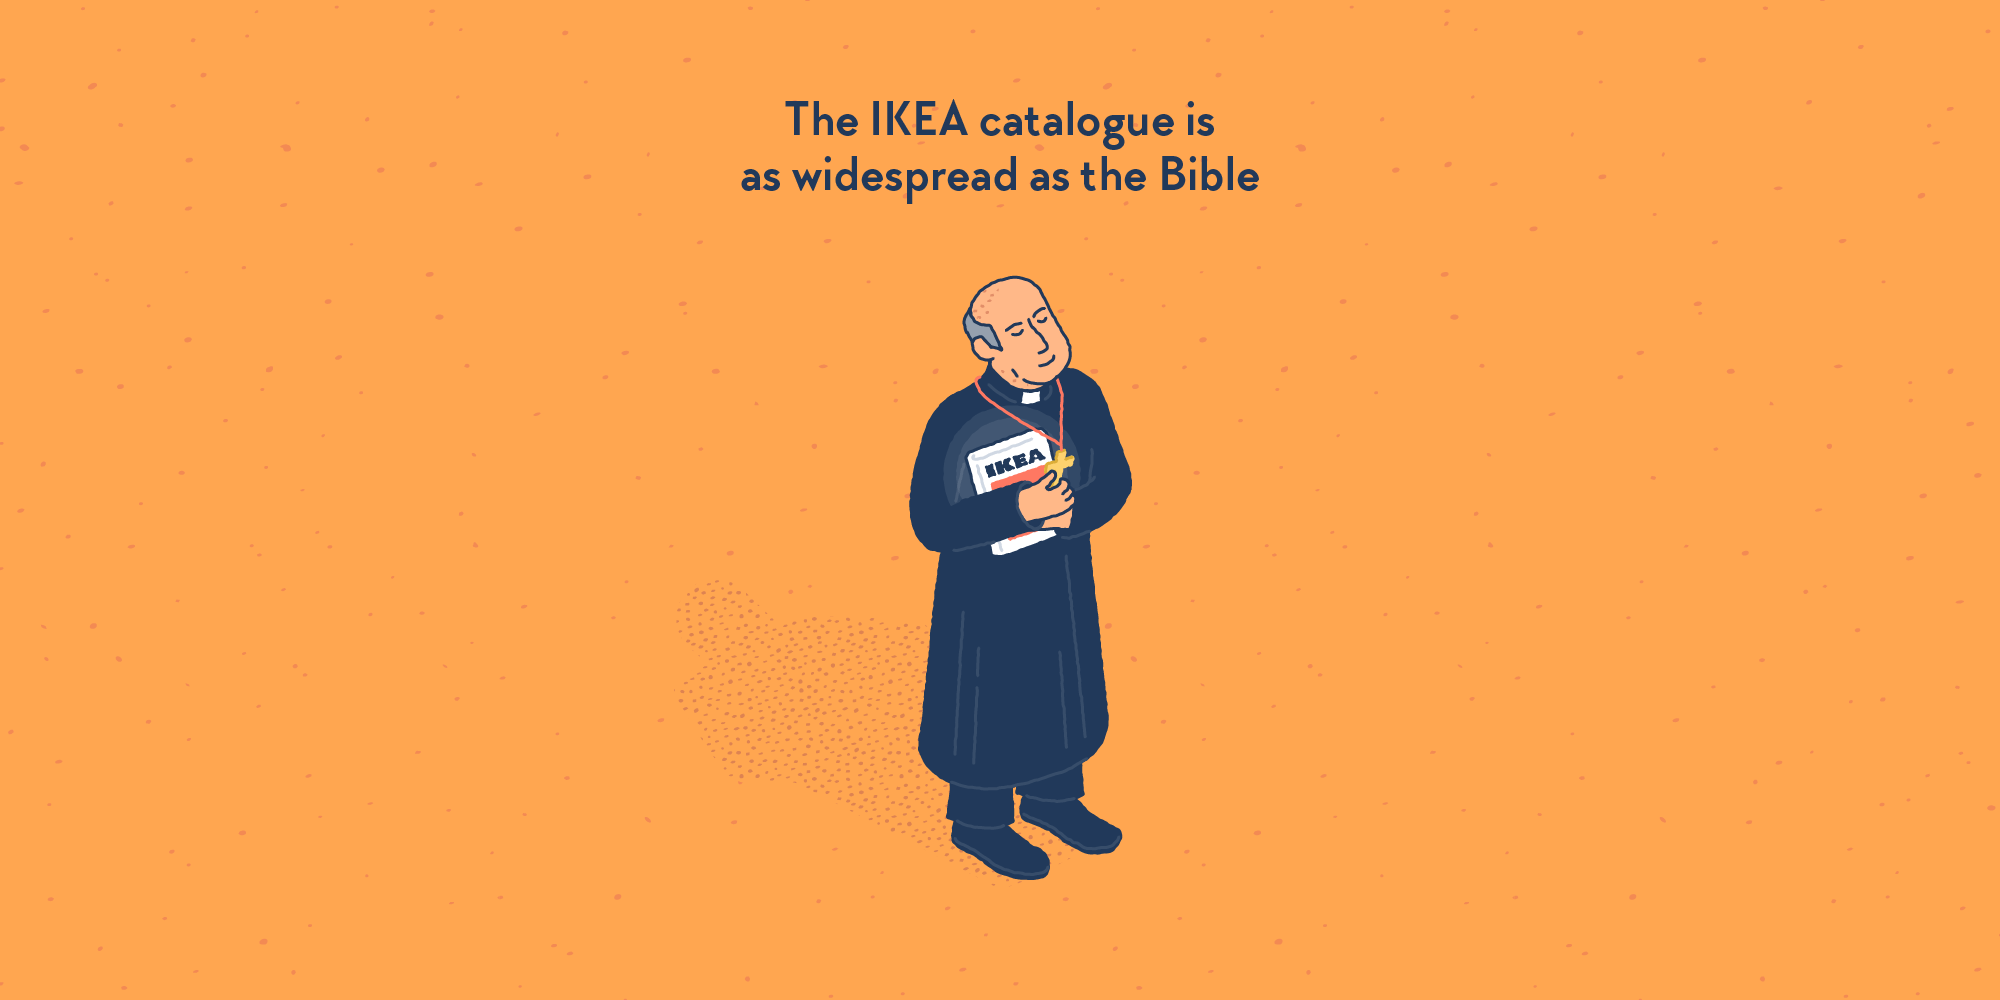 A christian priest holding the IKEA catalogue close to his chest.